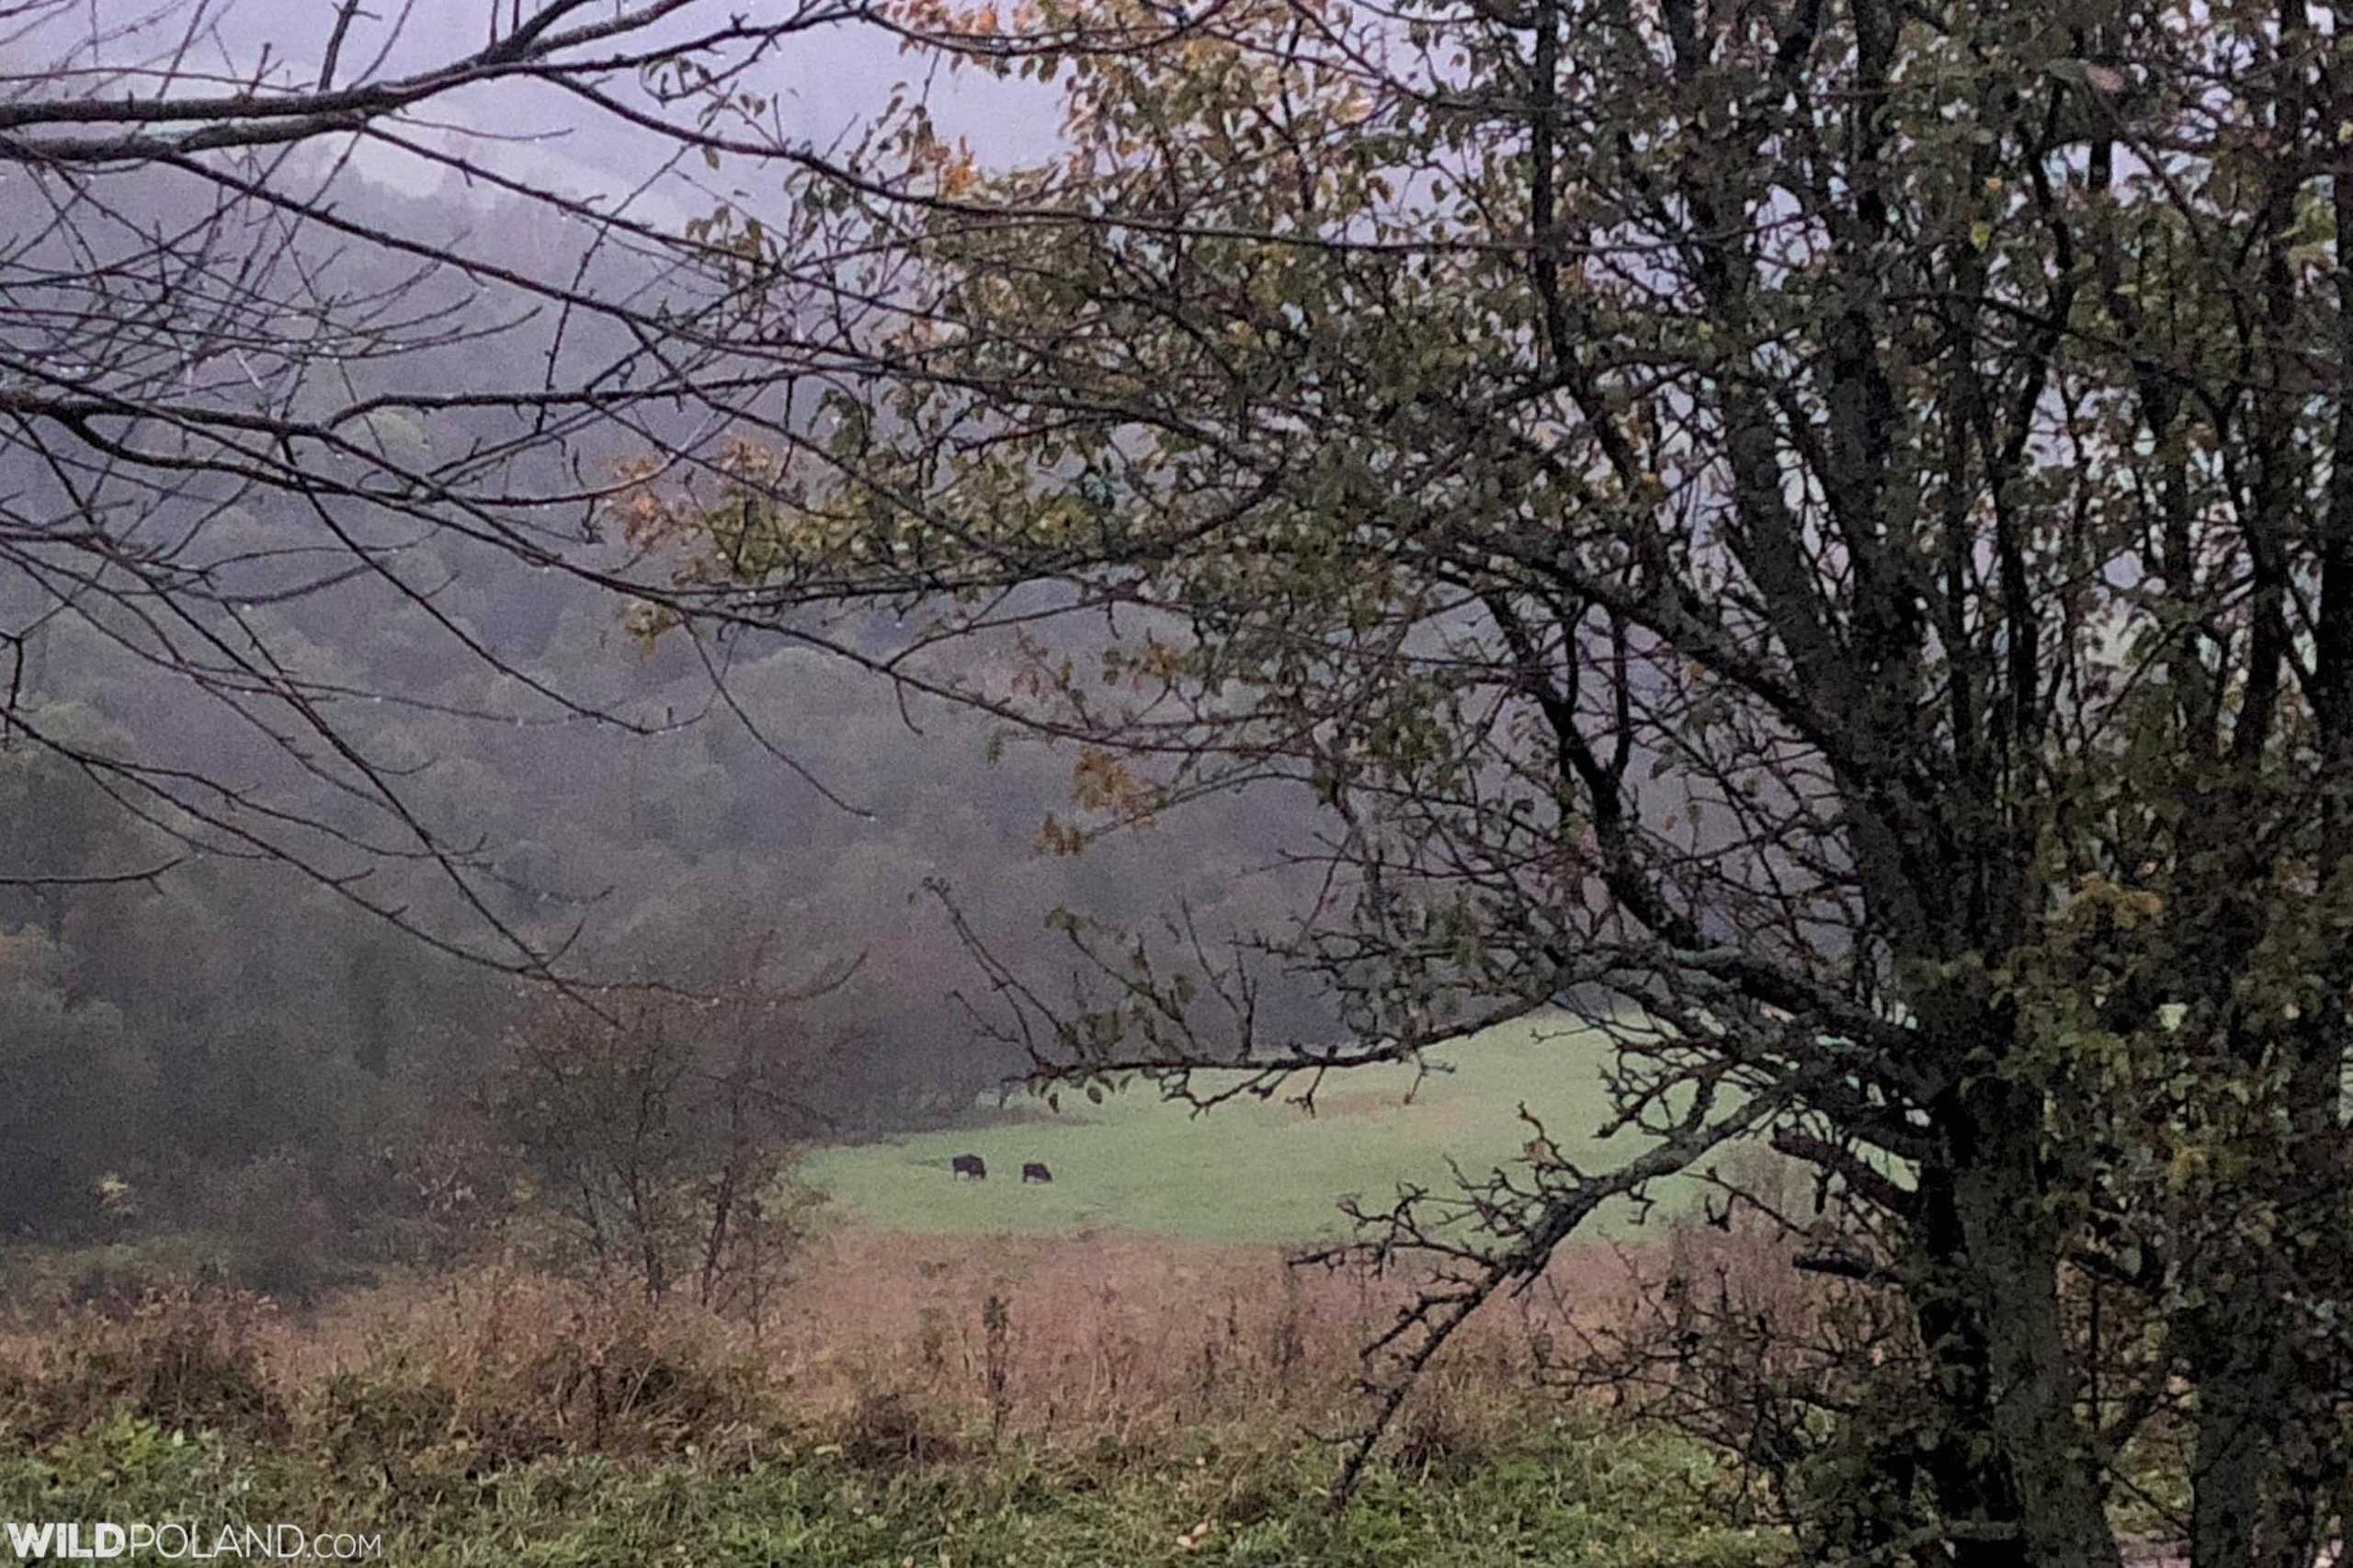 European Bison on a rainy evening in the Bieszczady Mts